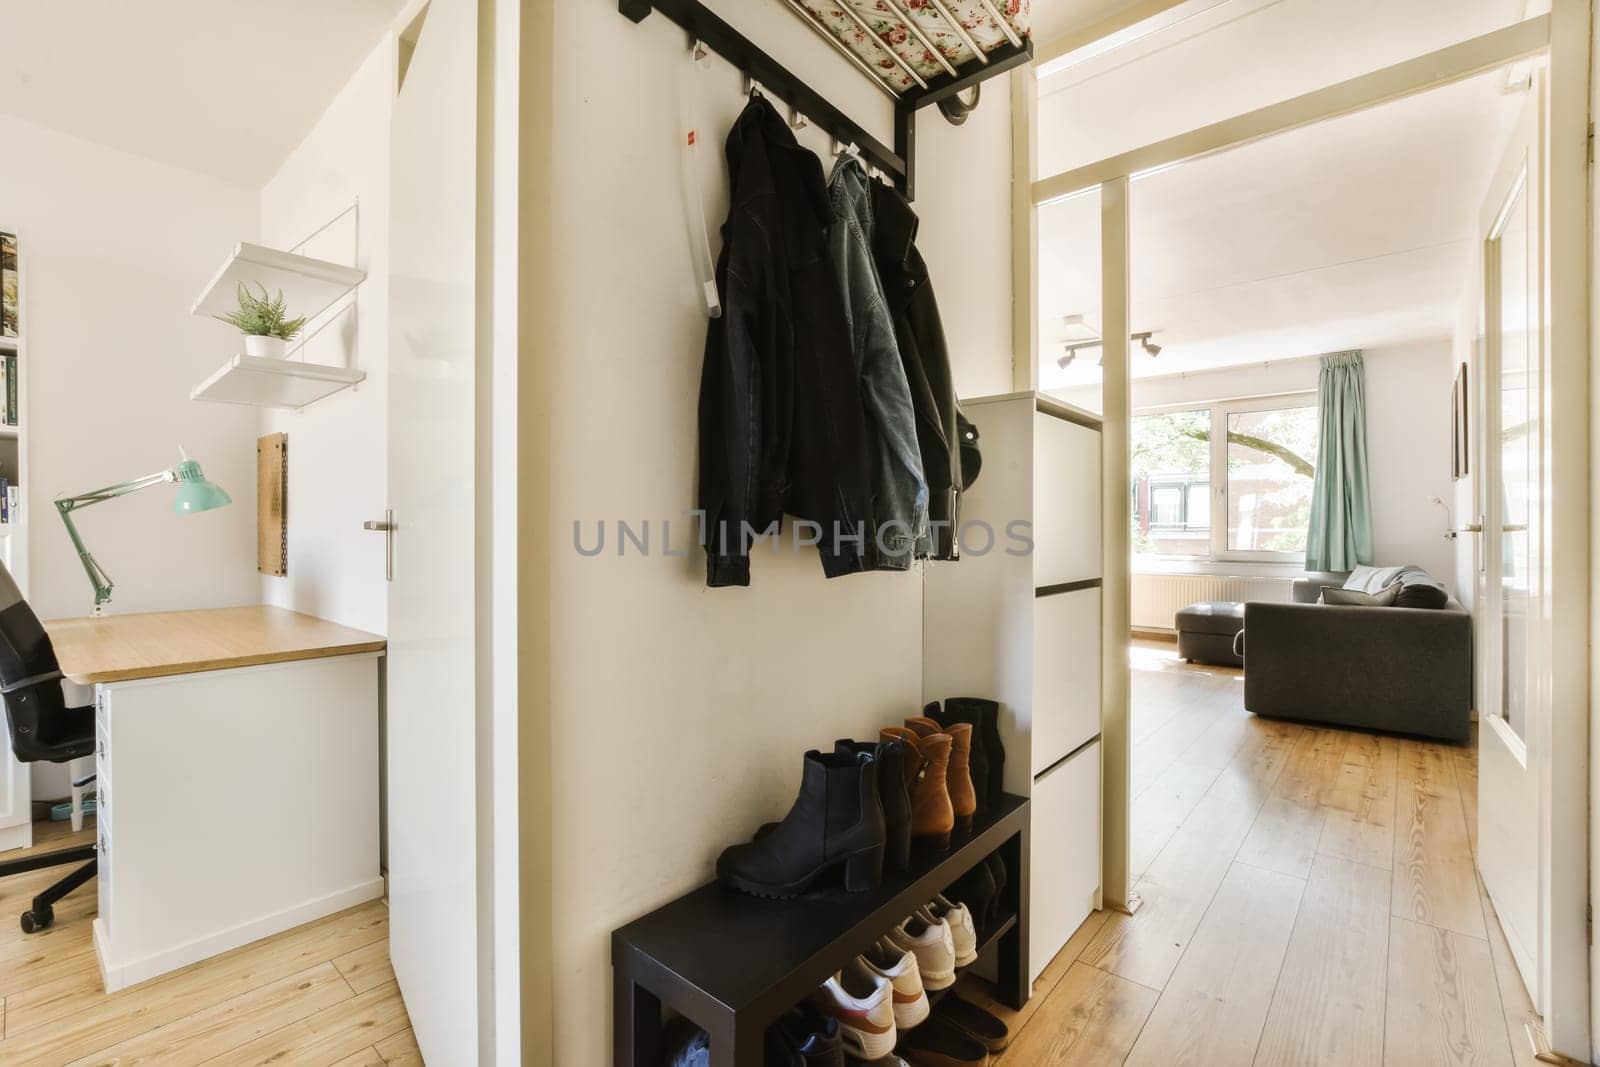 the inside of a house with wood flooring and clothes hanging on a coat rack in the door is open